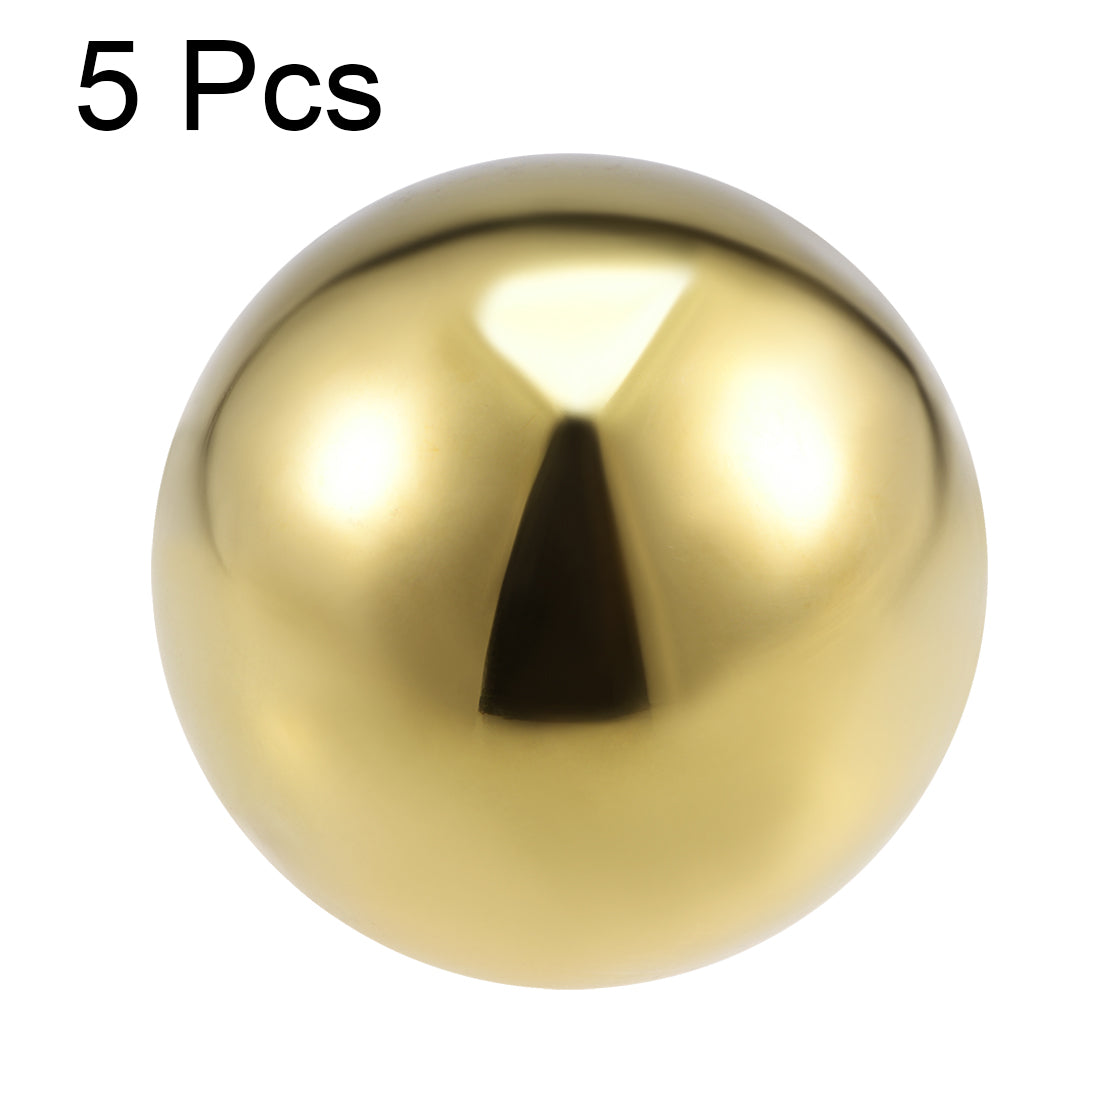 uxcell Uxcell 50mm Dia 201 Stainless Steel Hollow Cap Ball Spheres for Handrail Stair Newel Post Gold Tone 5pcs